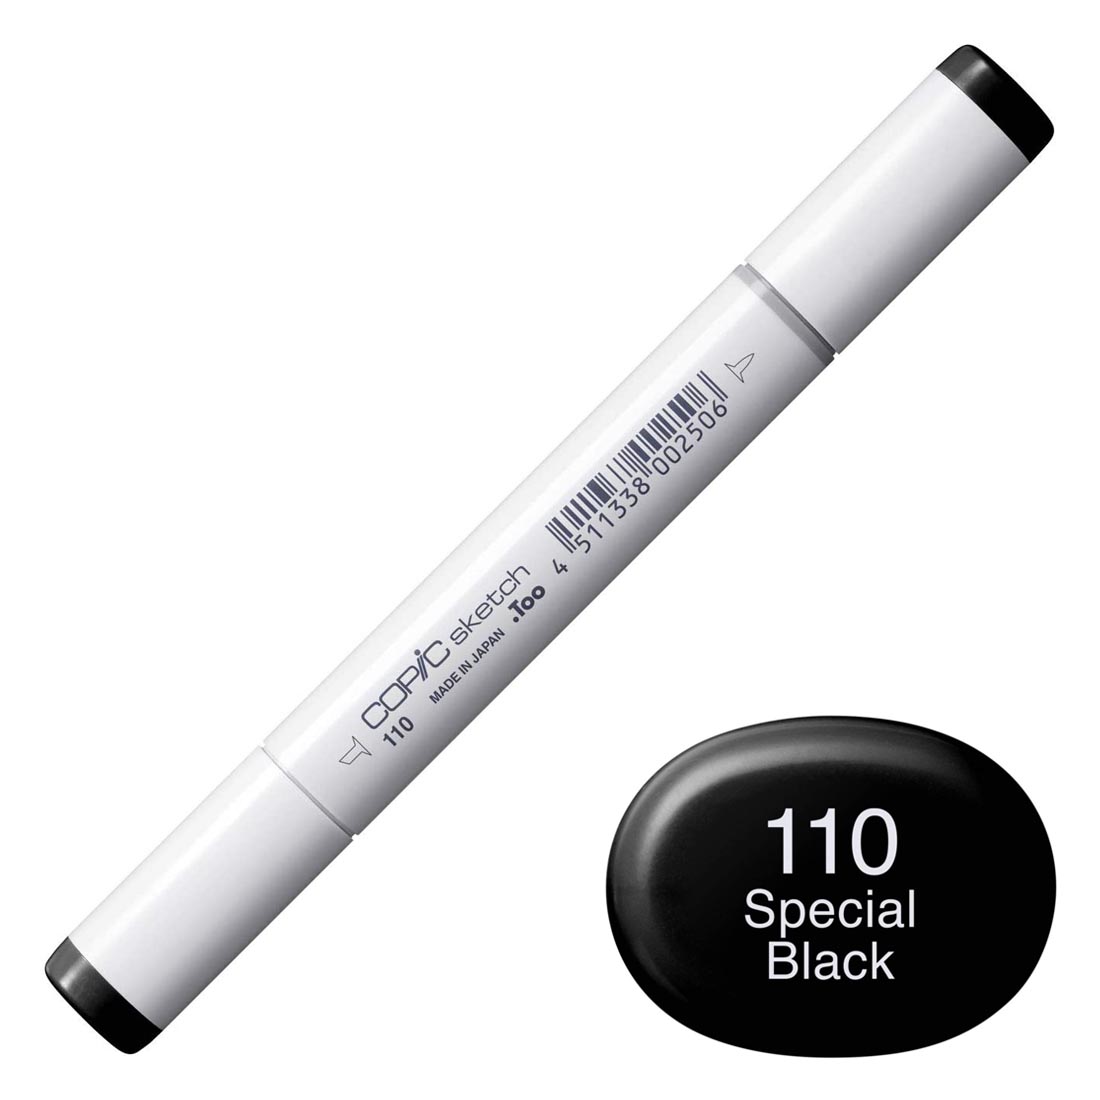 COPIC Sketch Marker with a color swatch and text of 110 Special Black